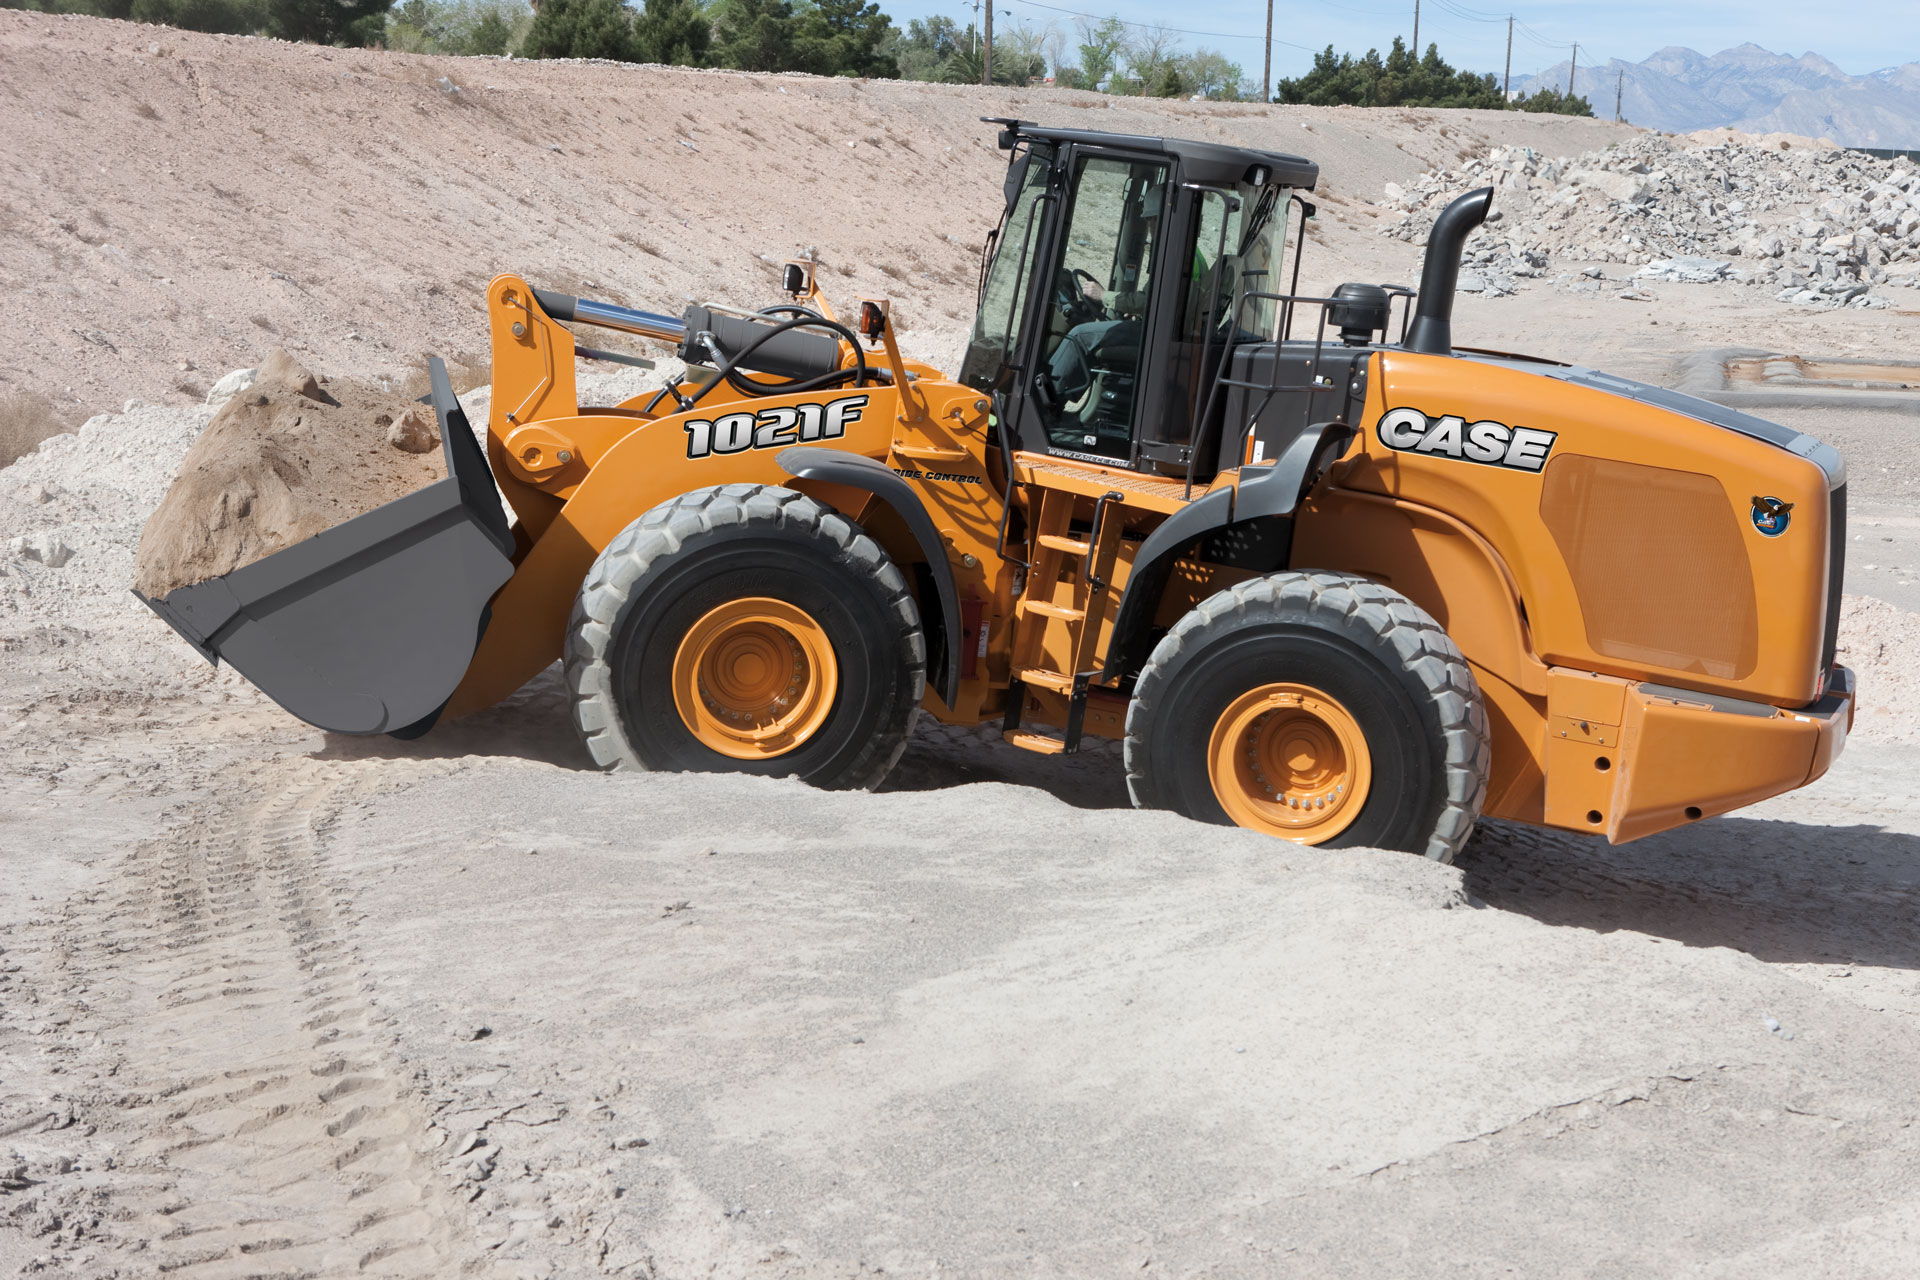 Case Wheel Loader Pics, Vehicles Collection